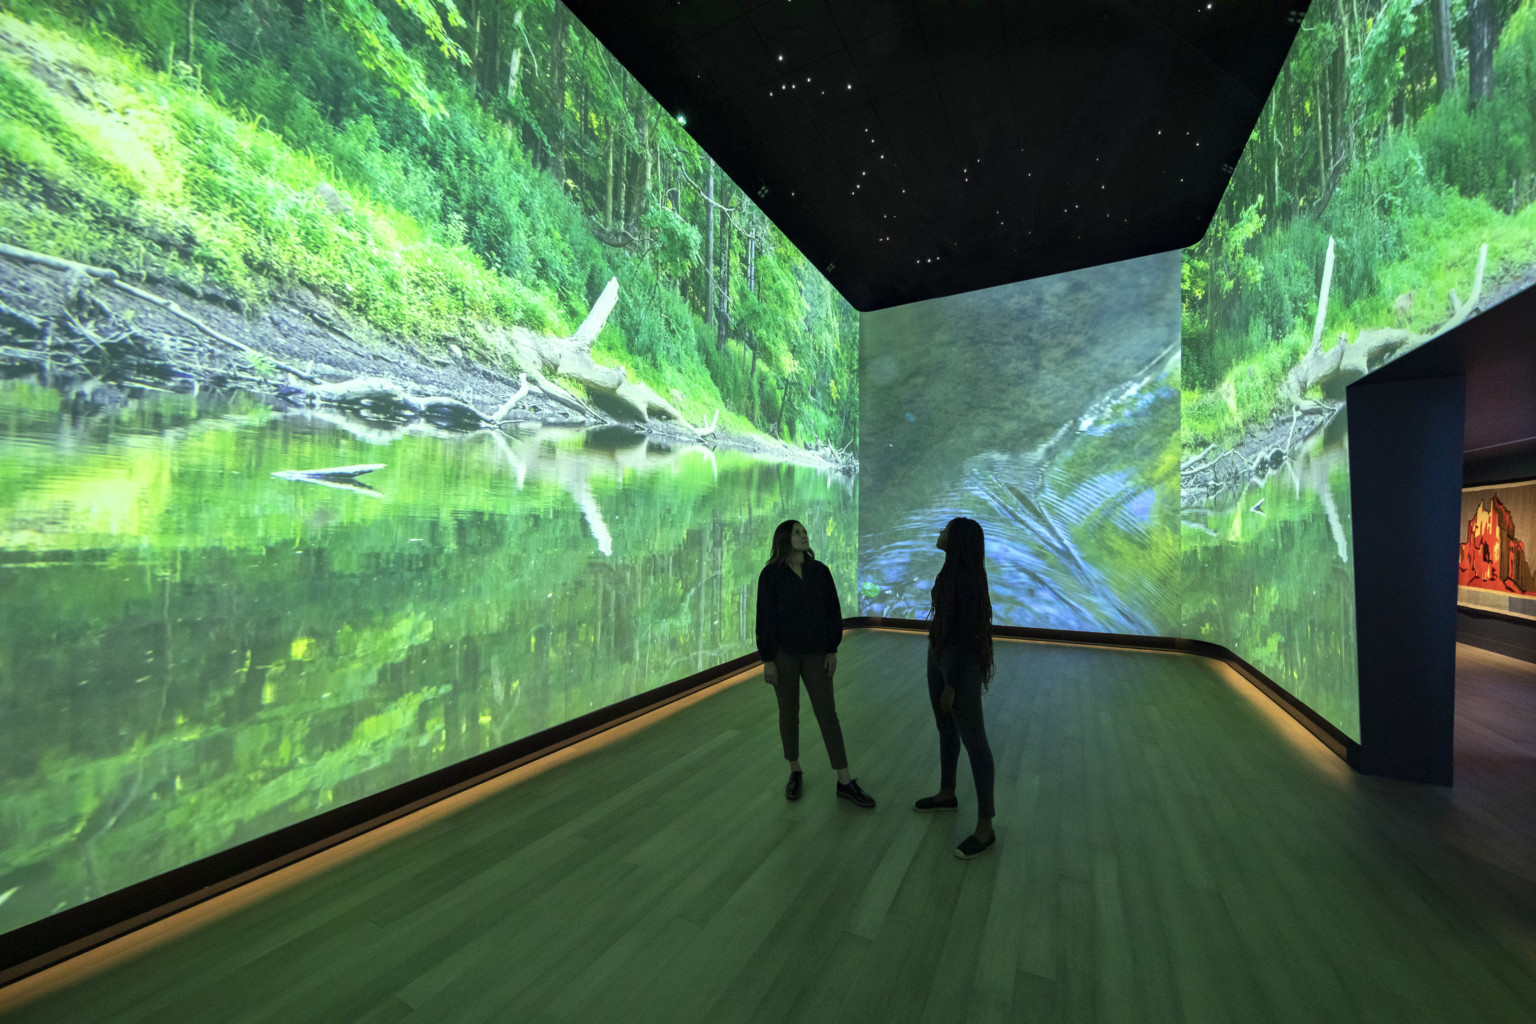 An immersive art exhibit at the Heard Museum with screens on all visible walls of the room showing a stream surrounded by greenery